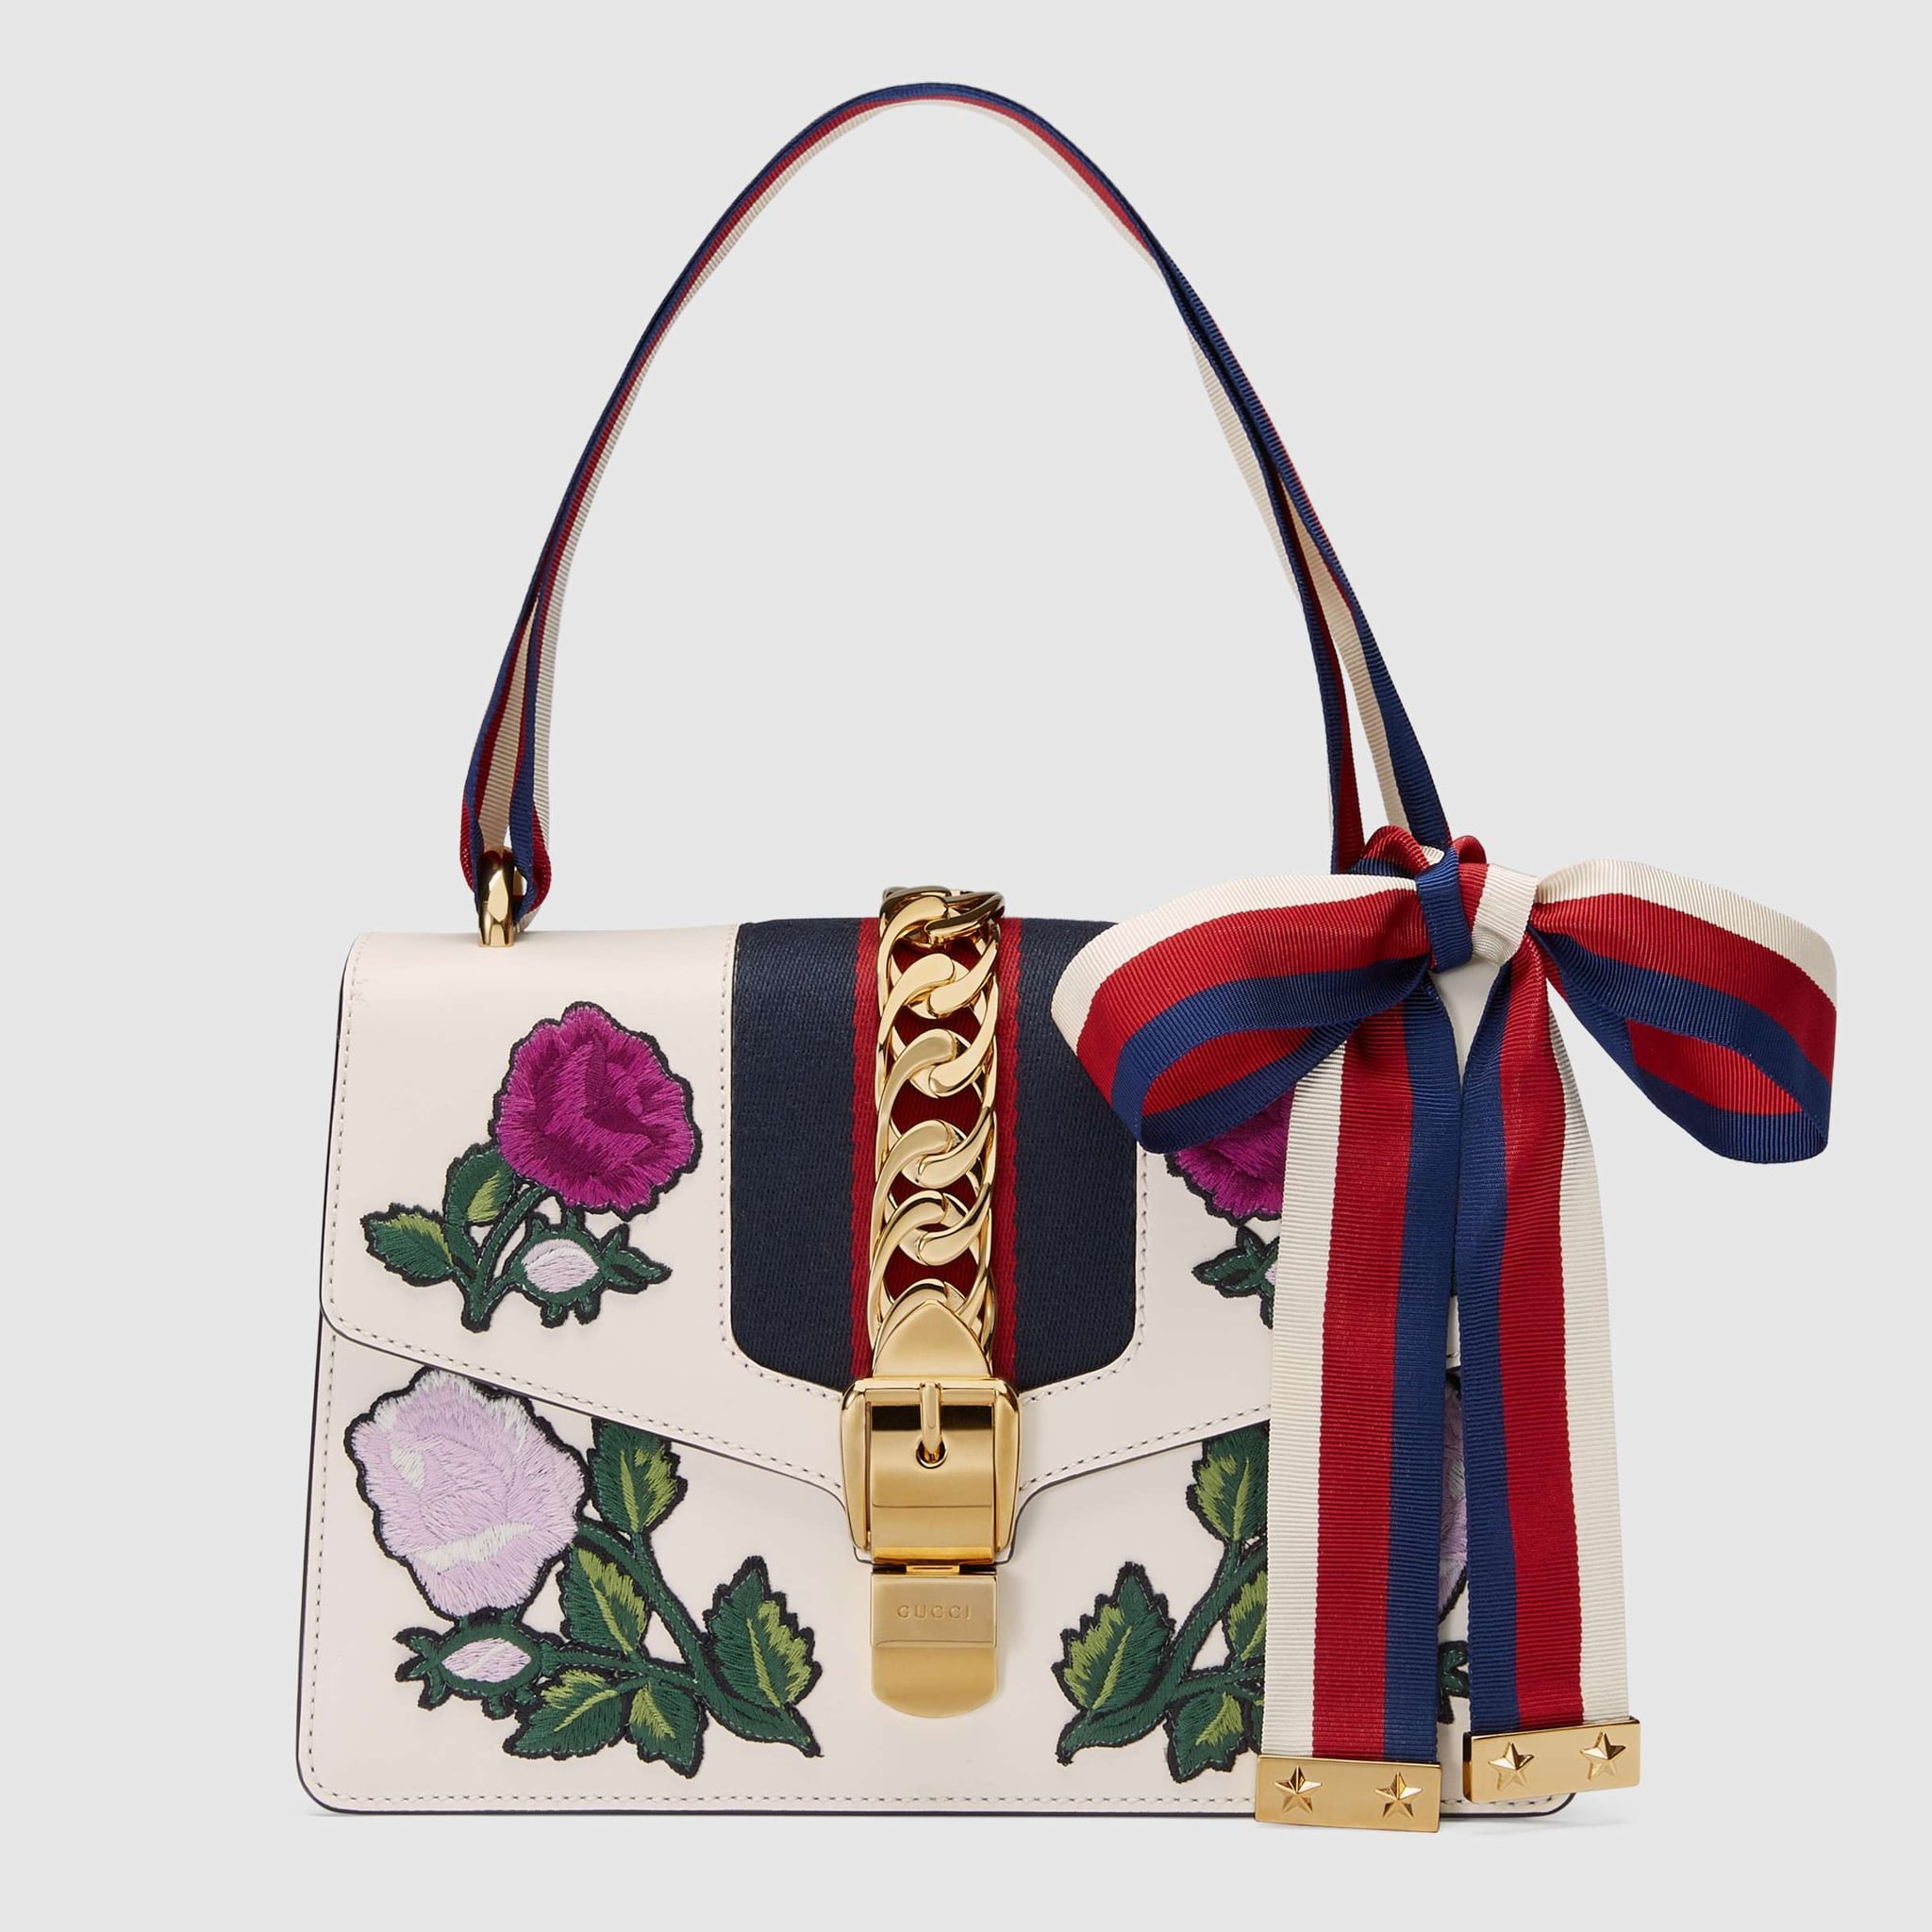 gucci bag new collection 2018